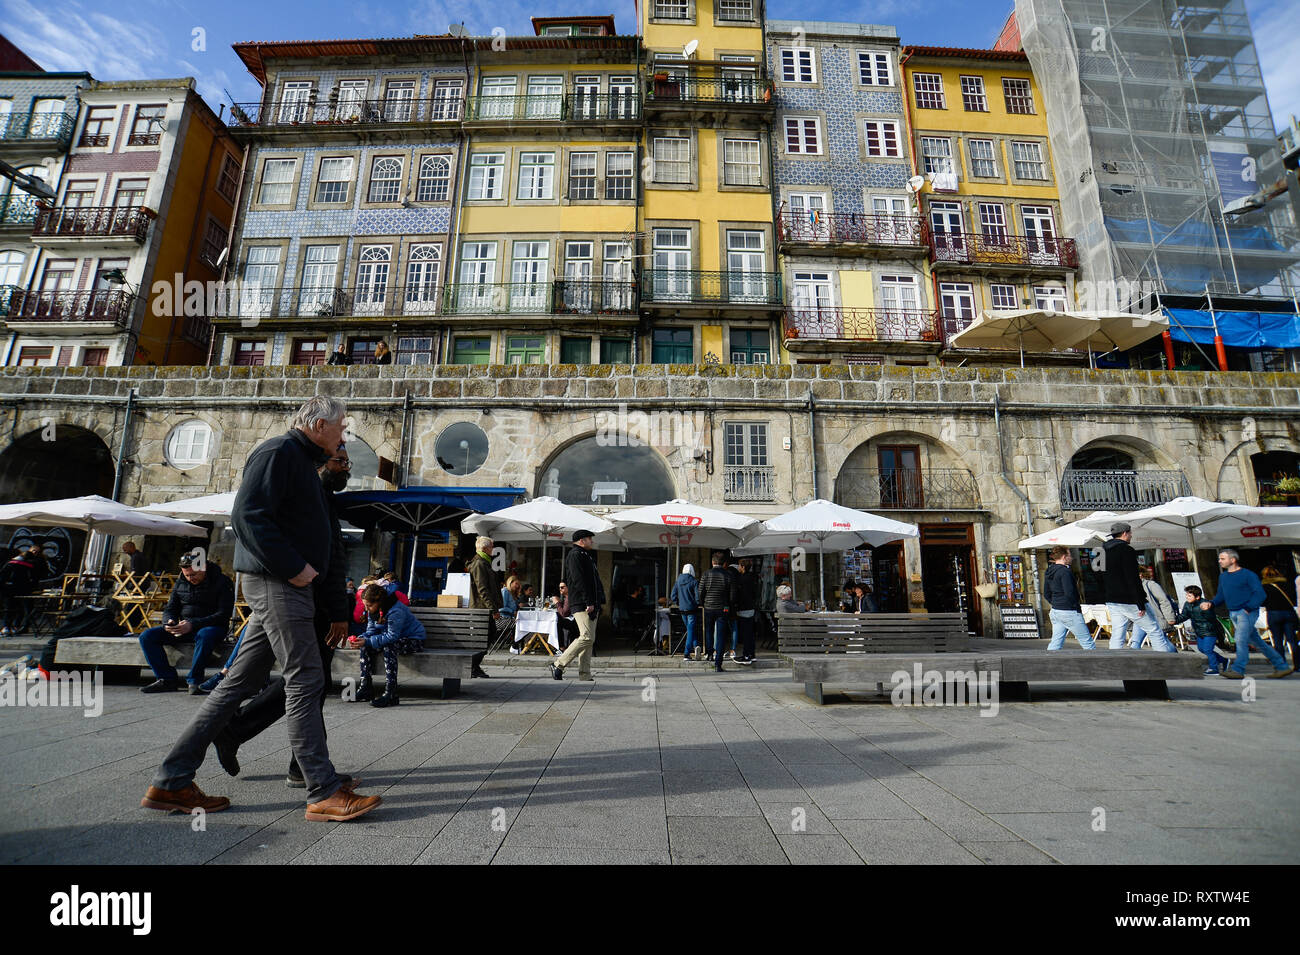 Tourists and locals seen walking with in the historical neighbourhood of Ribeira. In 2018, Porto entered the list of the 100 most visited cities in the world in a ranking prepared by Euromonitor International. In 2018 it is estimated that the number of tourists reached 2.39 million. Stock Photo